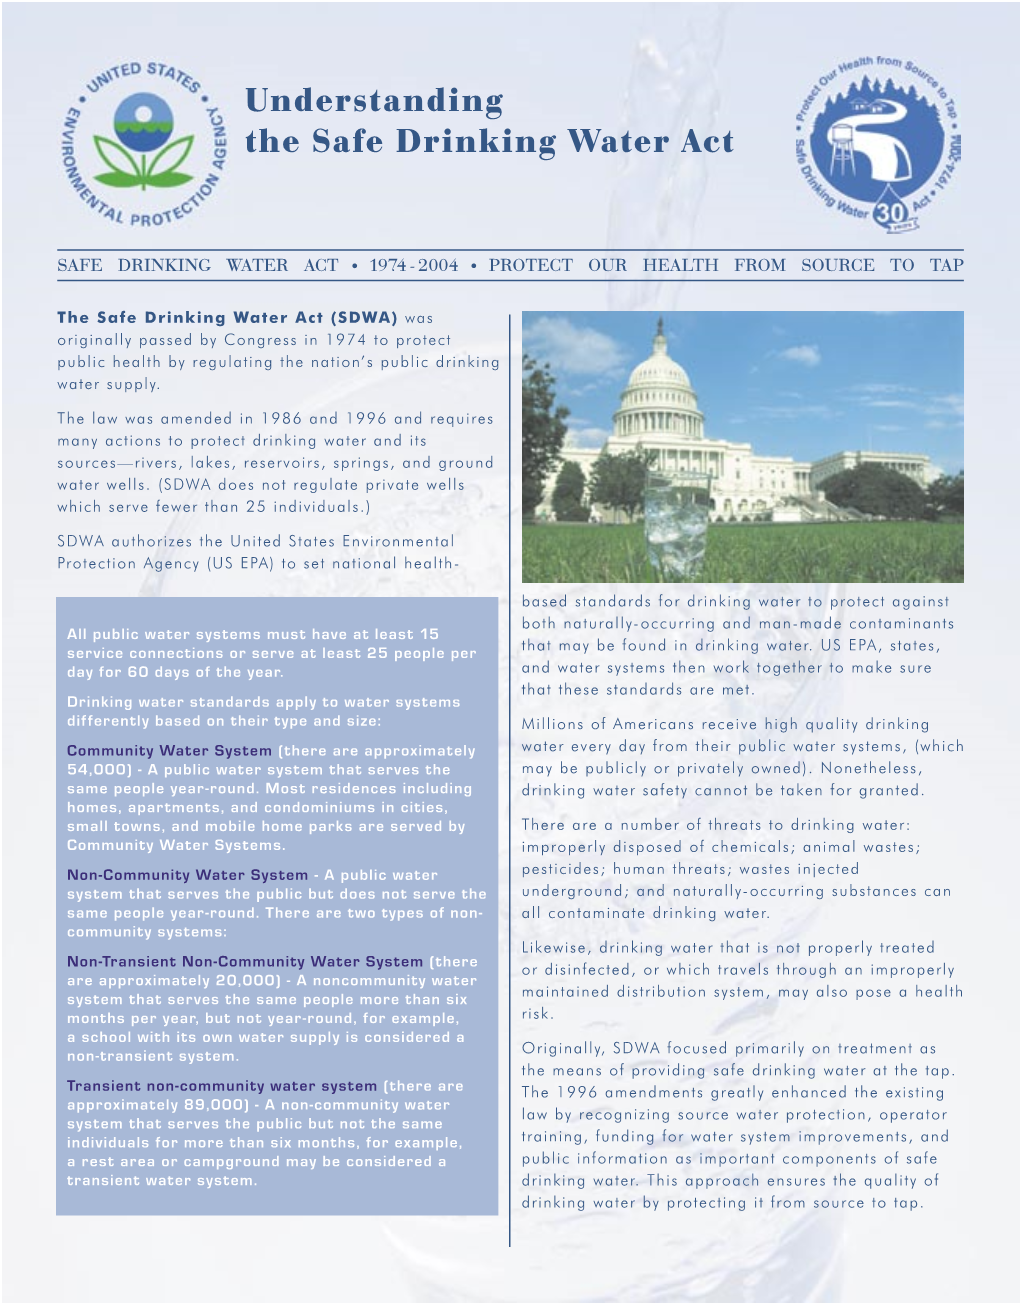 Safe Drinking Water Act